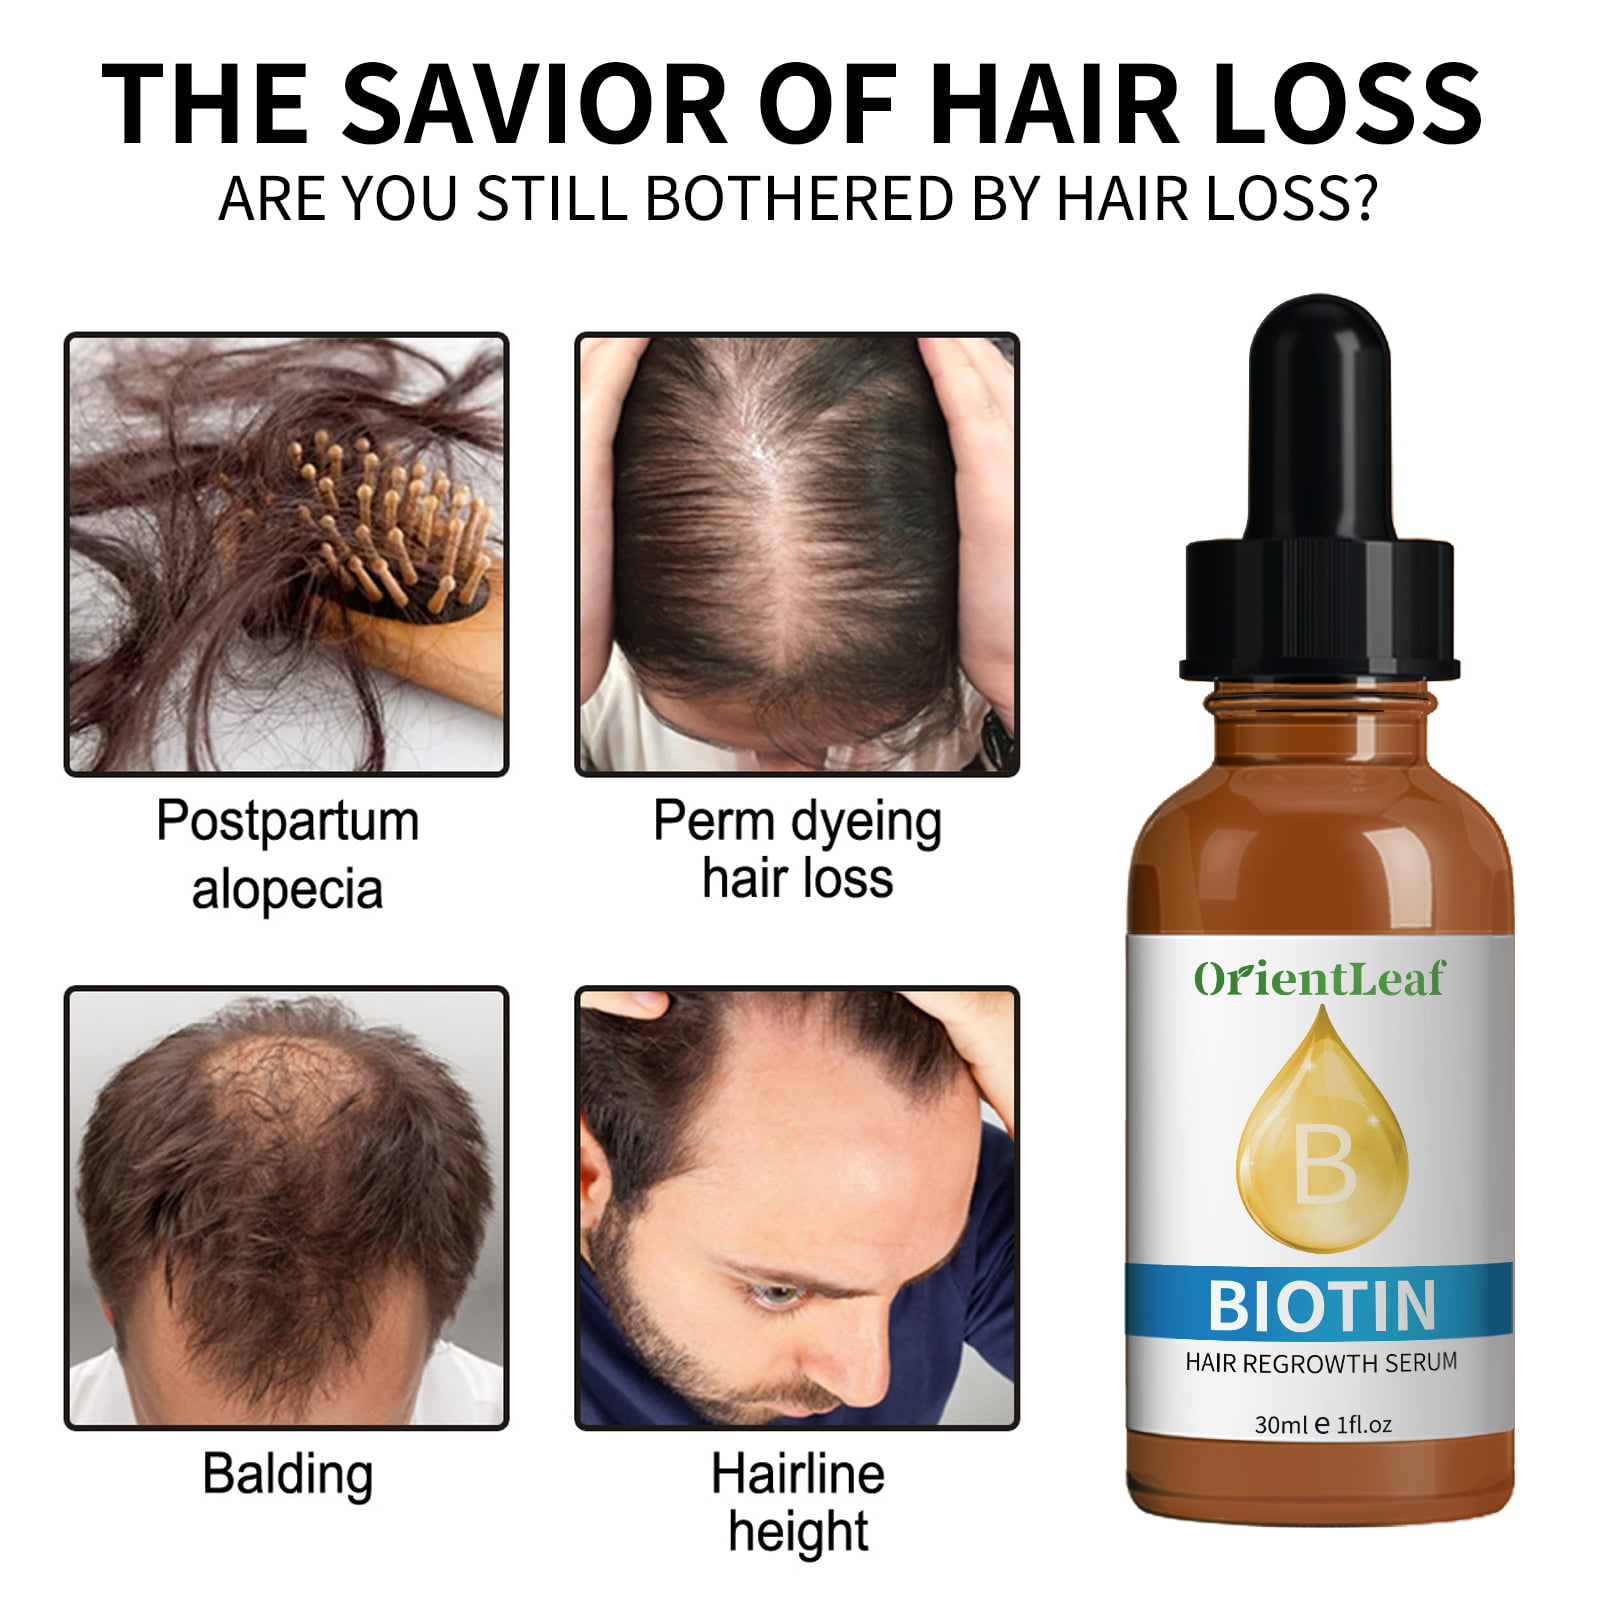 OrientLeaf Biotin Hair Growth Serum Advanced Topical Formula to Help Grow  Healthy, Strong Hair Suitable for Men and Women of All Hair Types Hair Loss  Support, Christmas Gift Set 